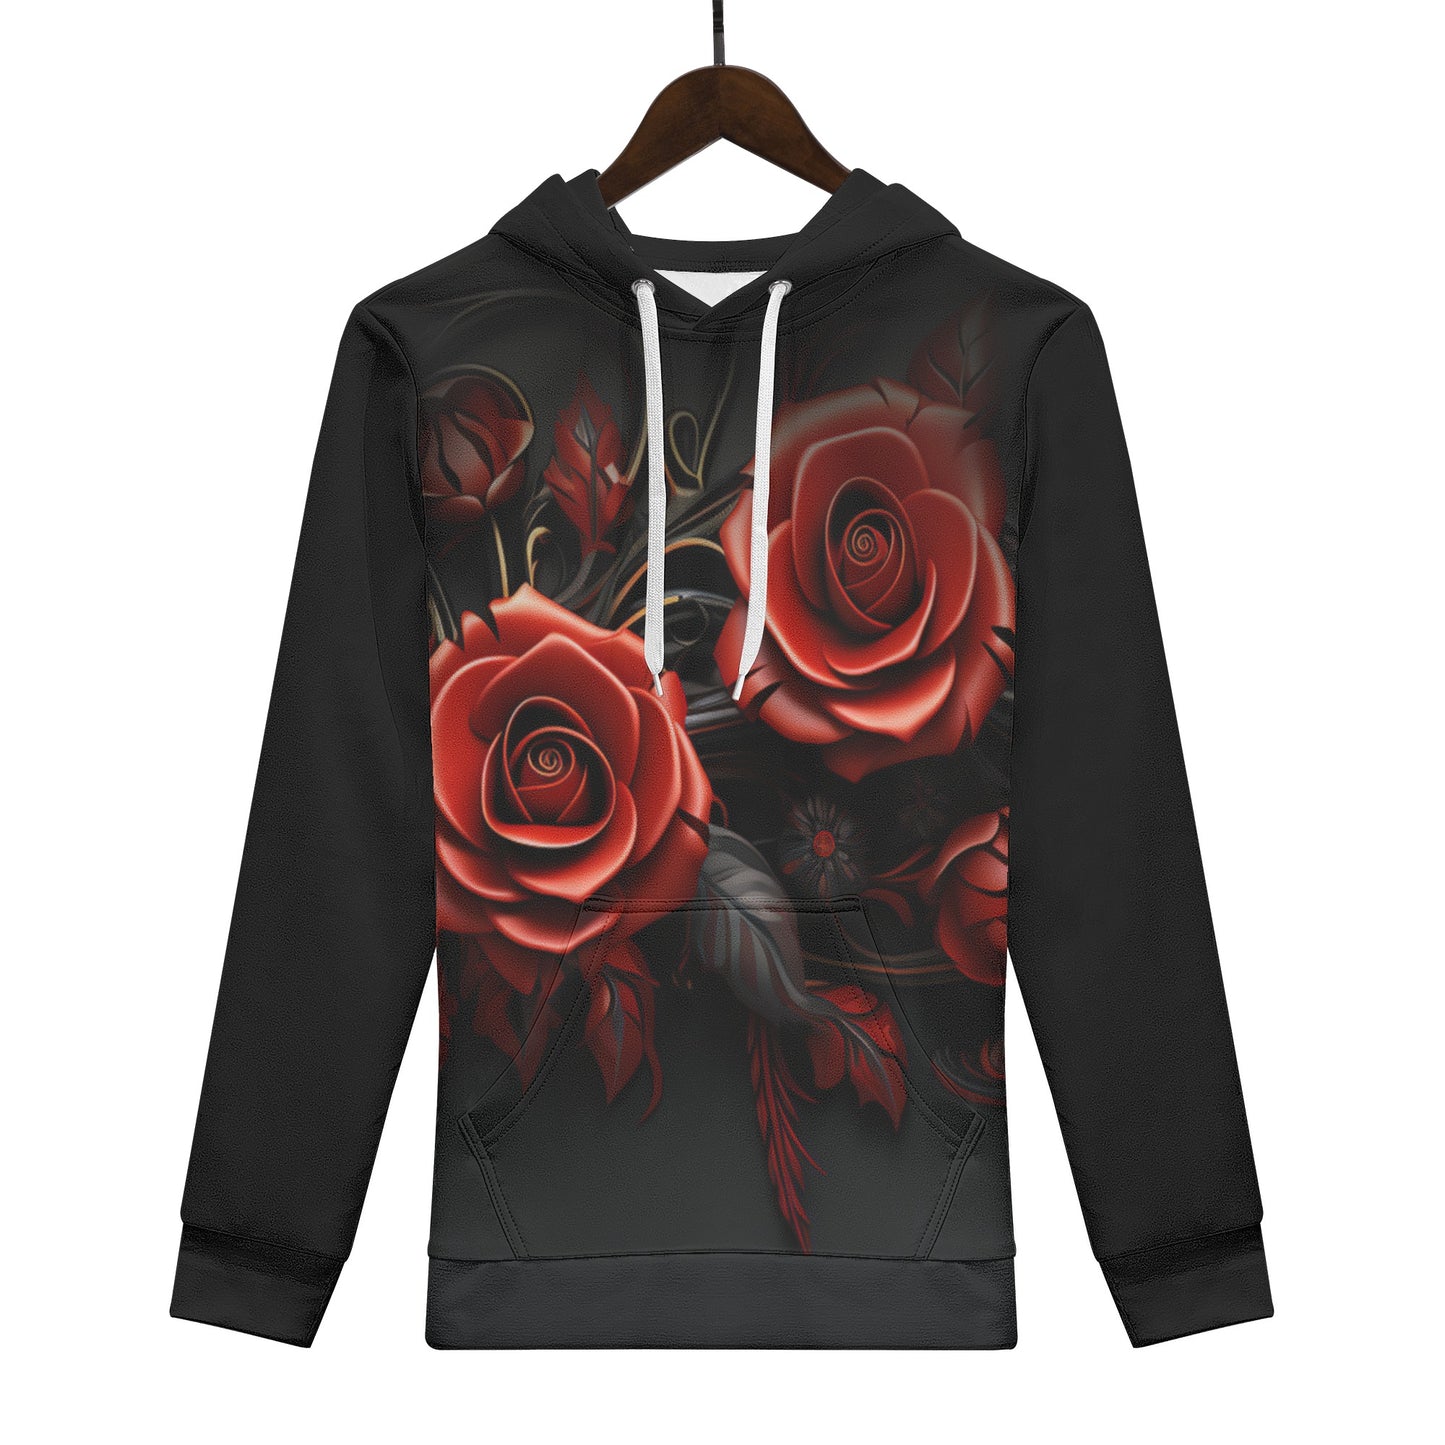 Neduz Designs Mens Hoodie with Rose Print - Comfortable and Warm Daily Wear